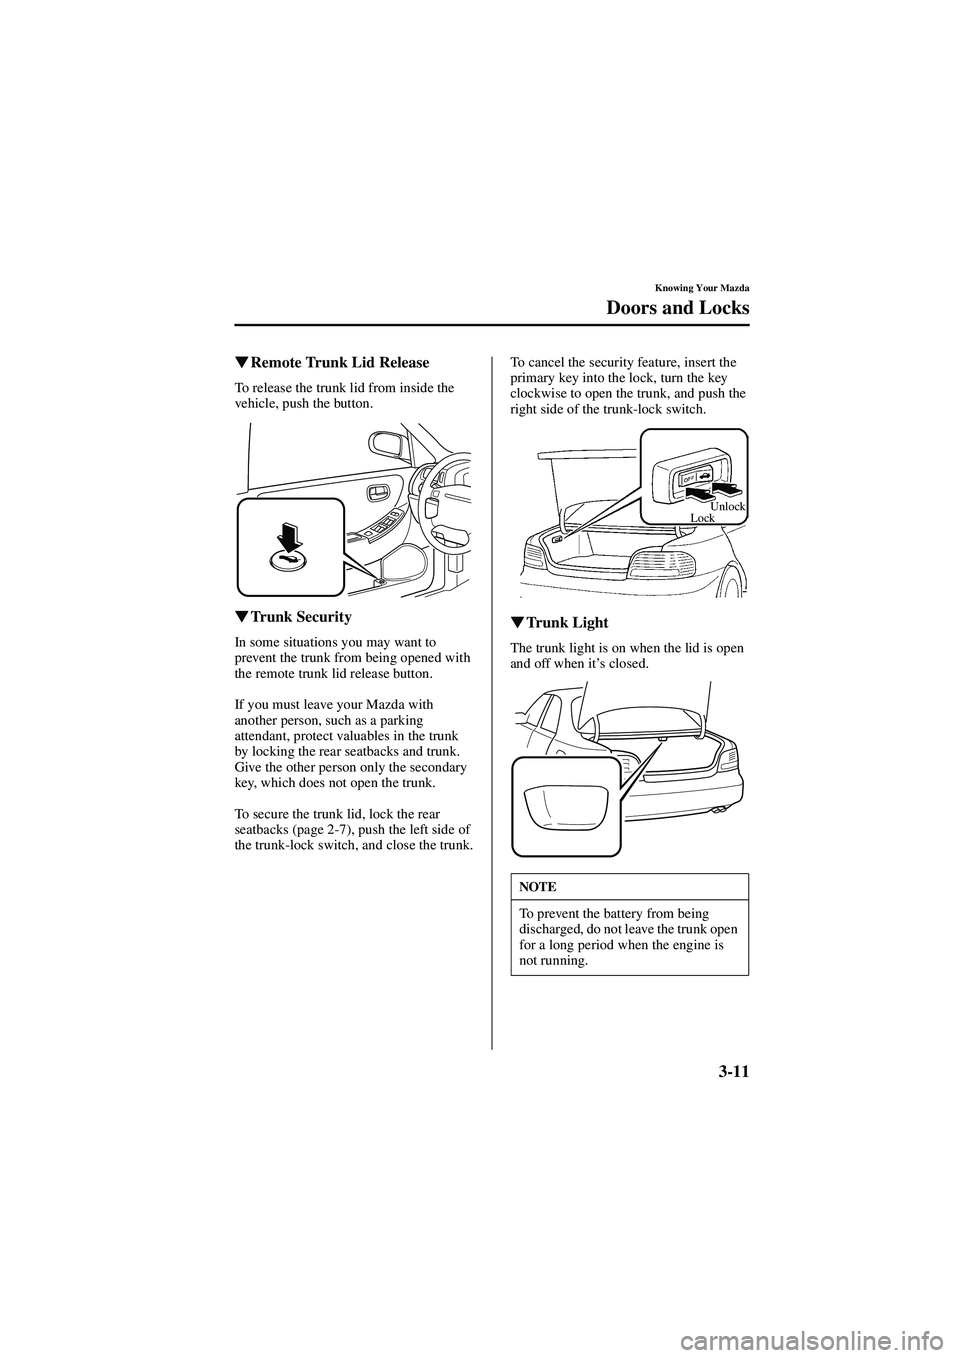 MAZDA MODEL 626 2002  Owners Manual 3-11
Knowing Your Mazda
Doors and Locks
Form No. 8Q50-EA-01G

  Remote Trunk Lid Release
To release the trunk lid from inside the 
vehicle, push the button.

  Trunk Security
In some situation